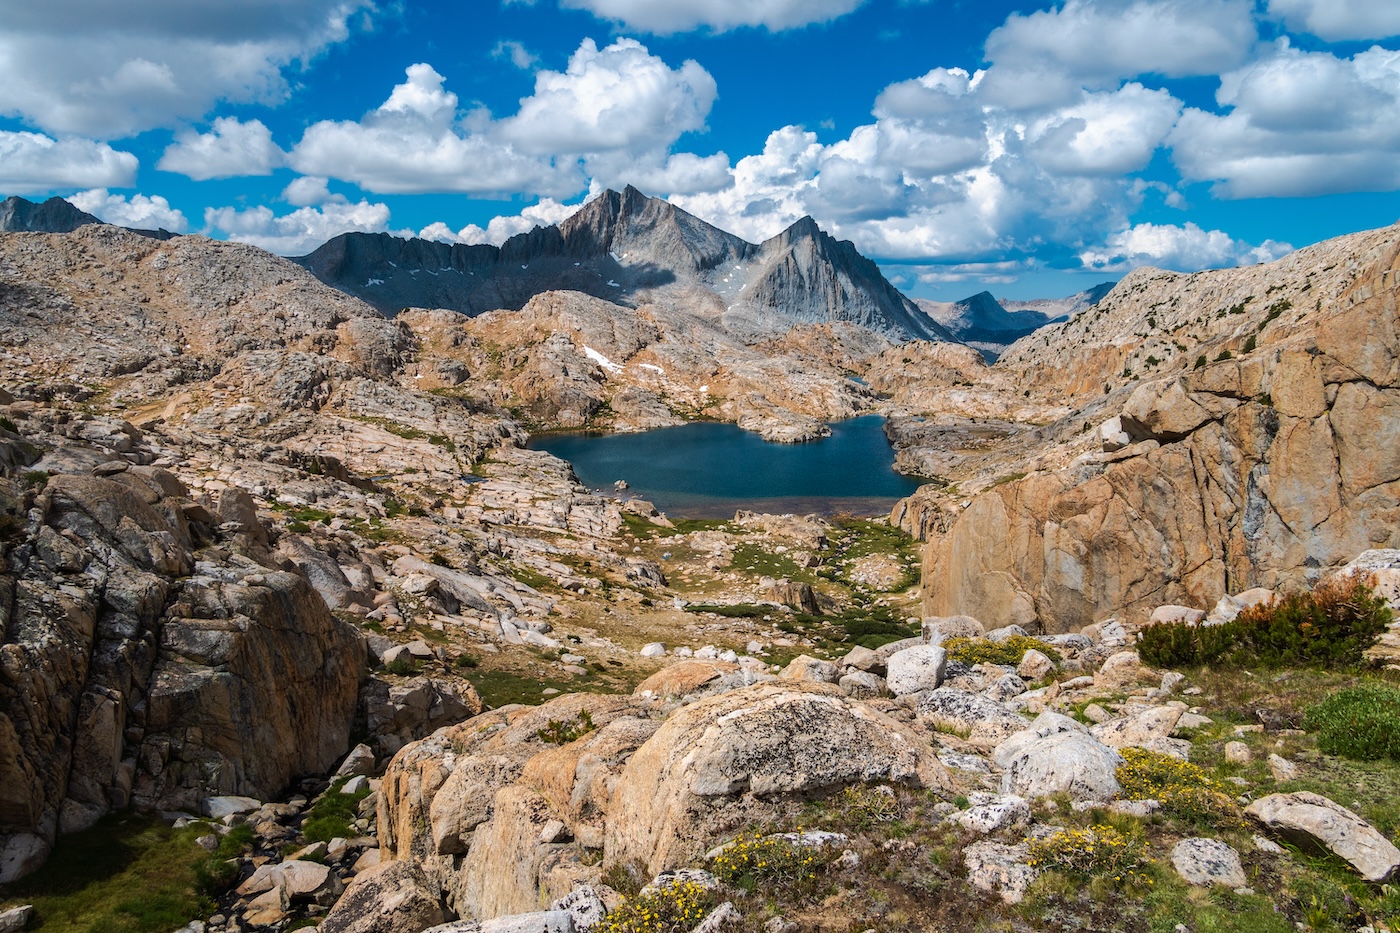 The Seven Gables from the Bear Lakes Basin in the Sierras. Photo by Brock Dallman